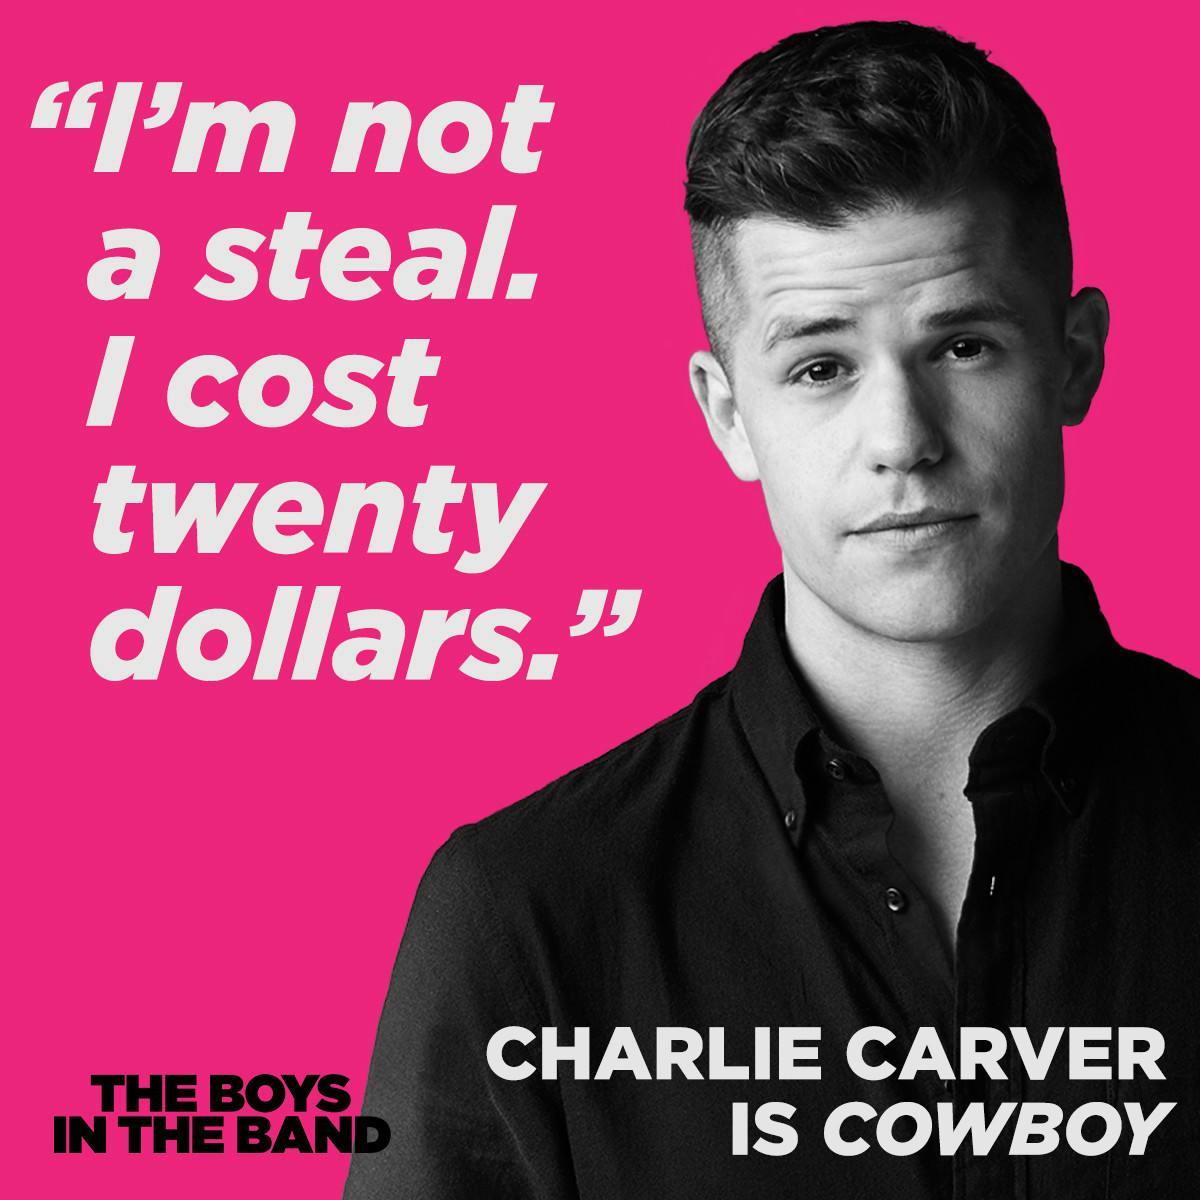 The Boys in the Band Broadway Cowboy Quote- Charlie Carver